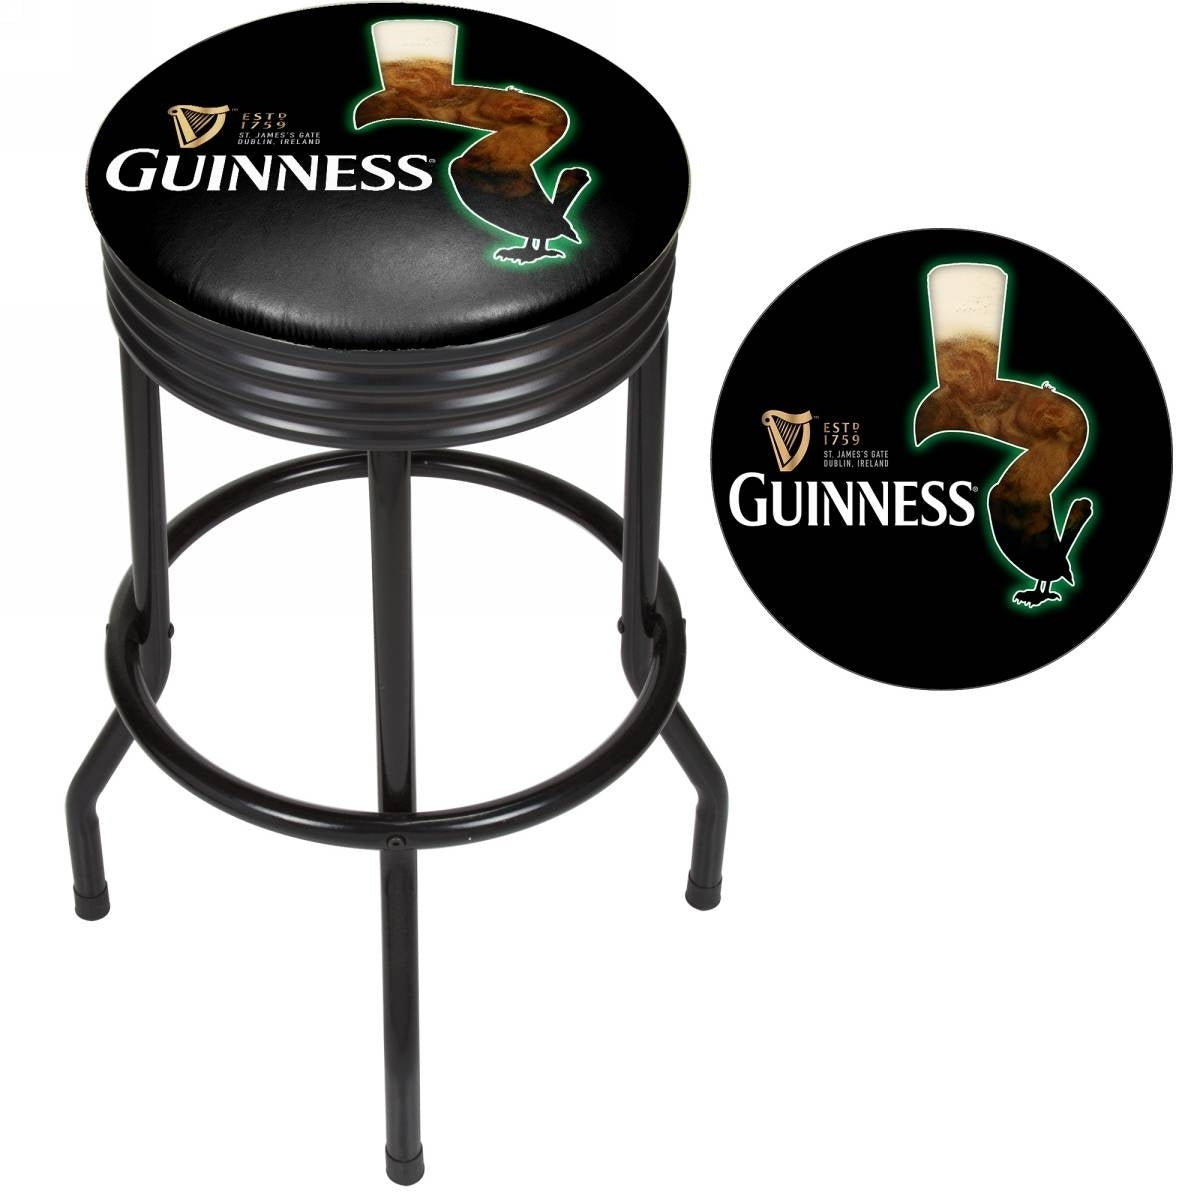 A Guinness Black Ribbed Bar Stool - Feathering with a Guinness logo on it.